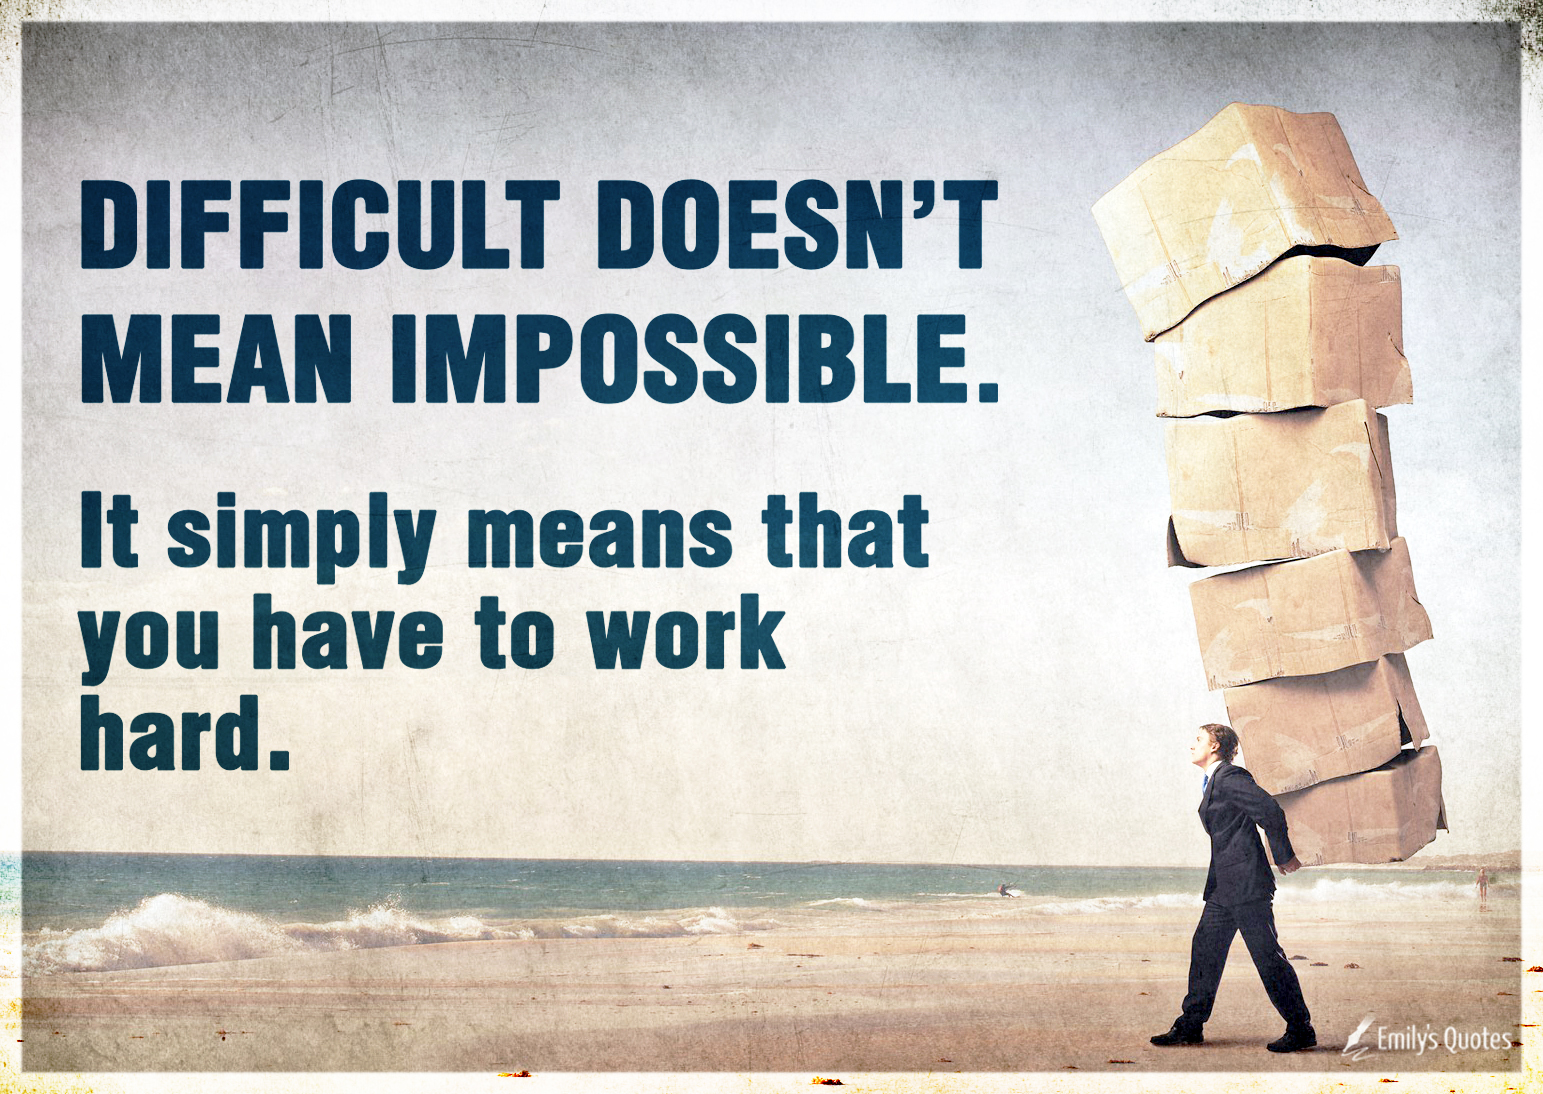 Difficult doesn’t mean impossible. It simply means that you have to